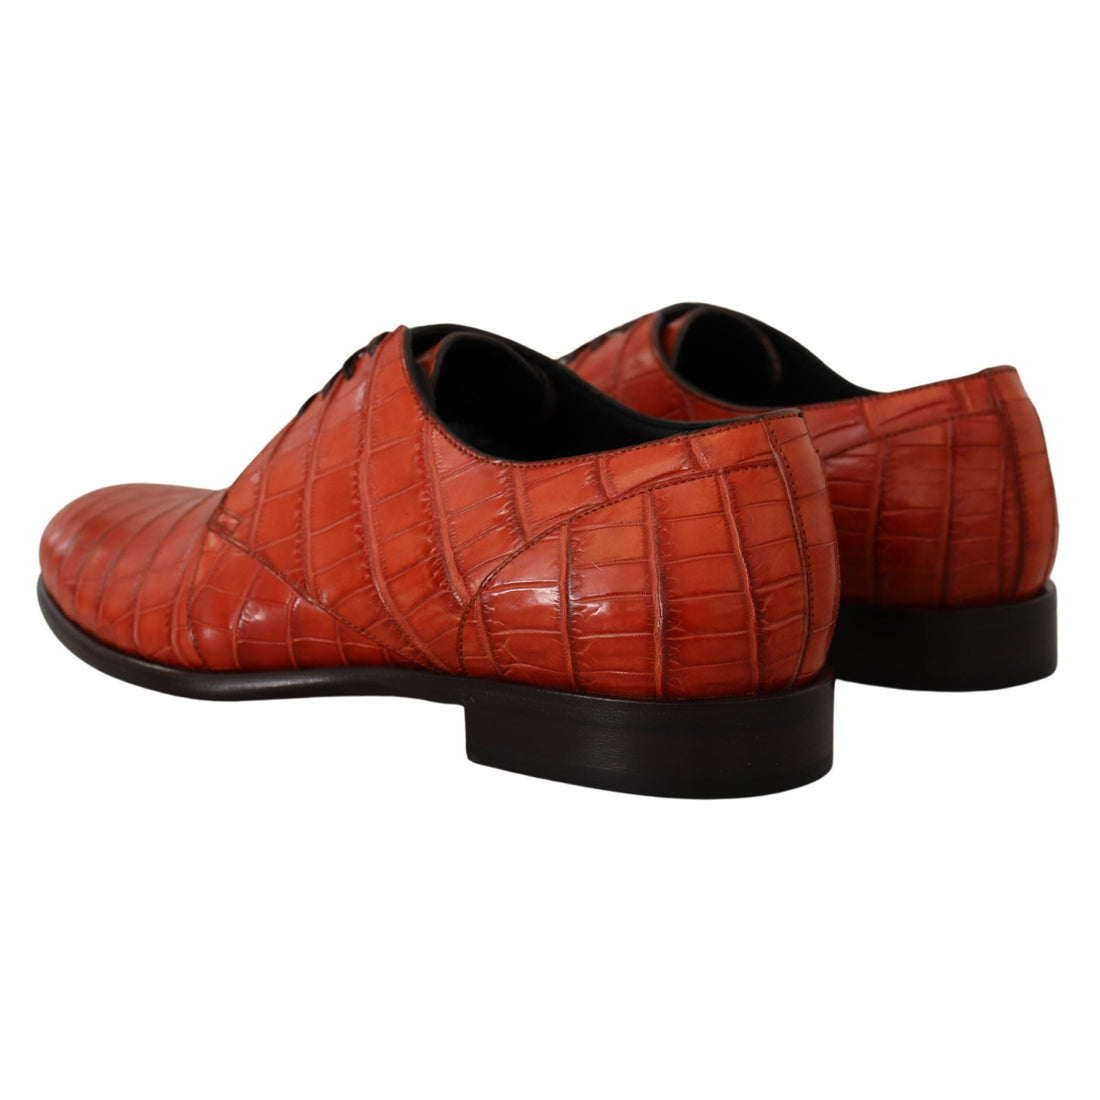 Dolce & Gabbana Exquisite Exotic Croc Leather Lace-Up Dress Shoes